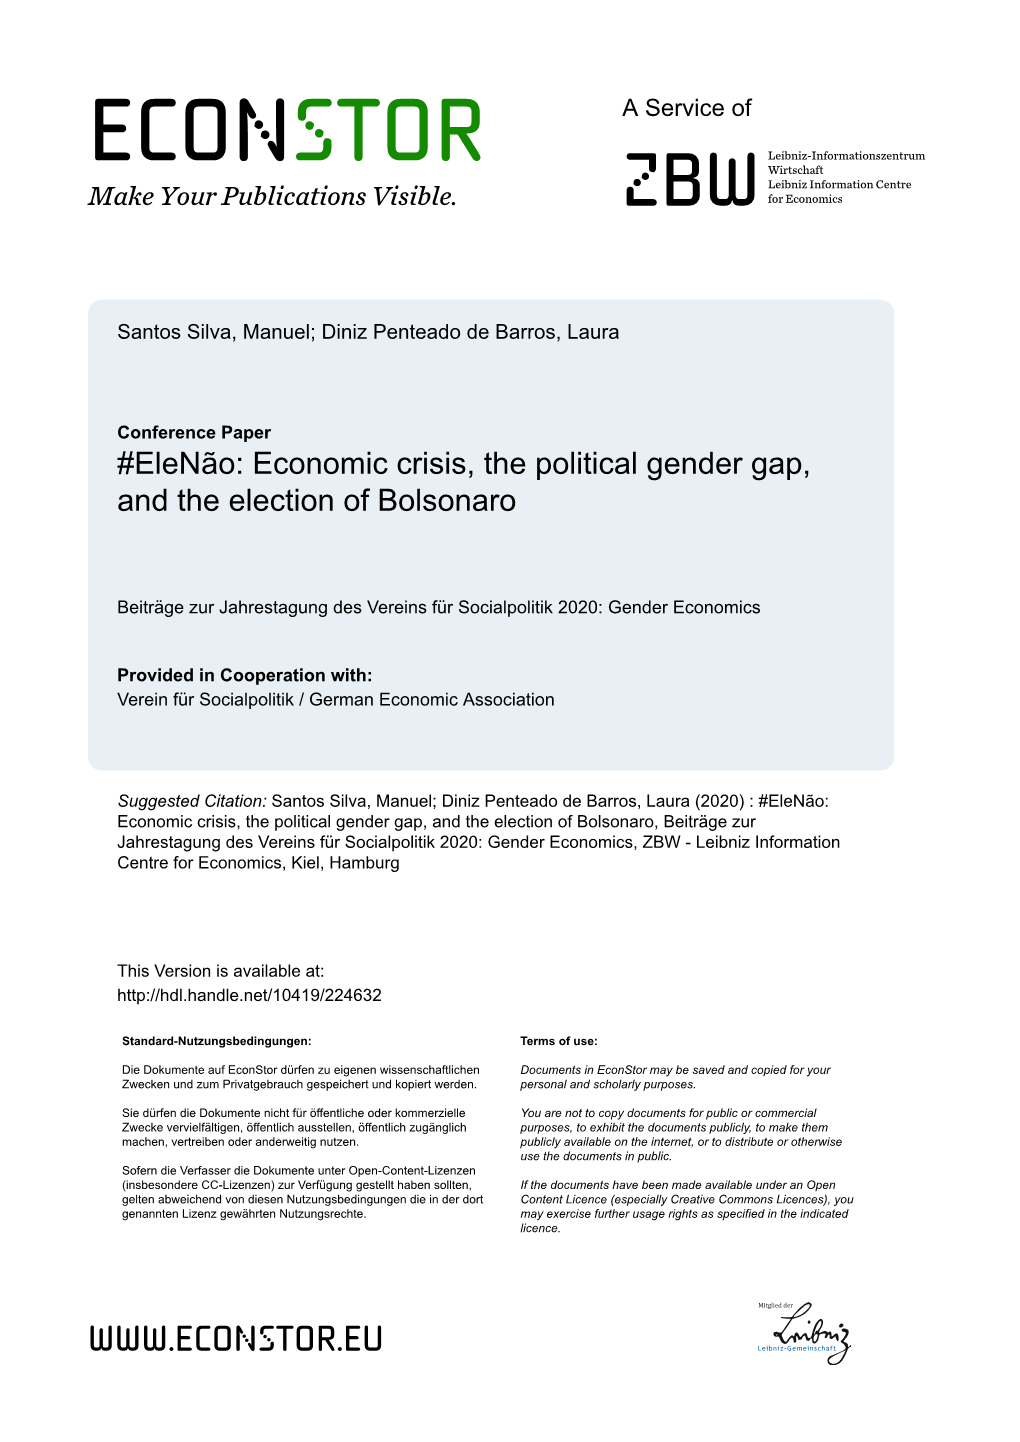 Economic Crisis, the Political Gender Gap, and the Election of Bolsonaro